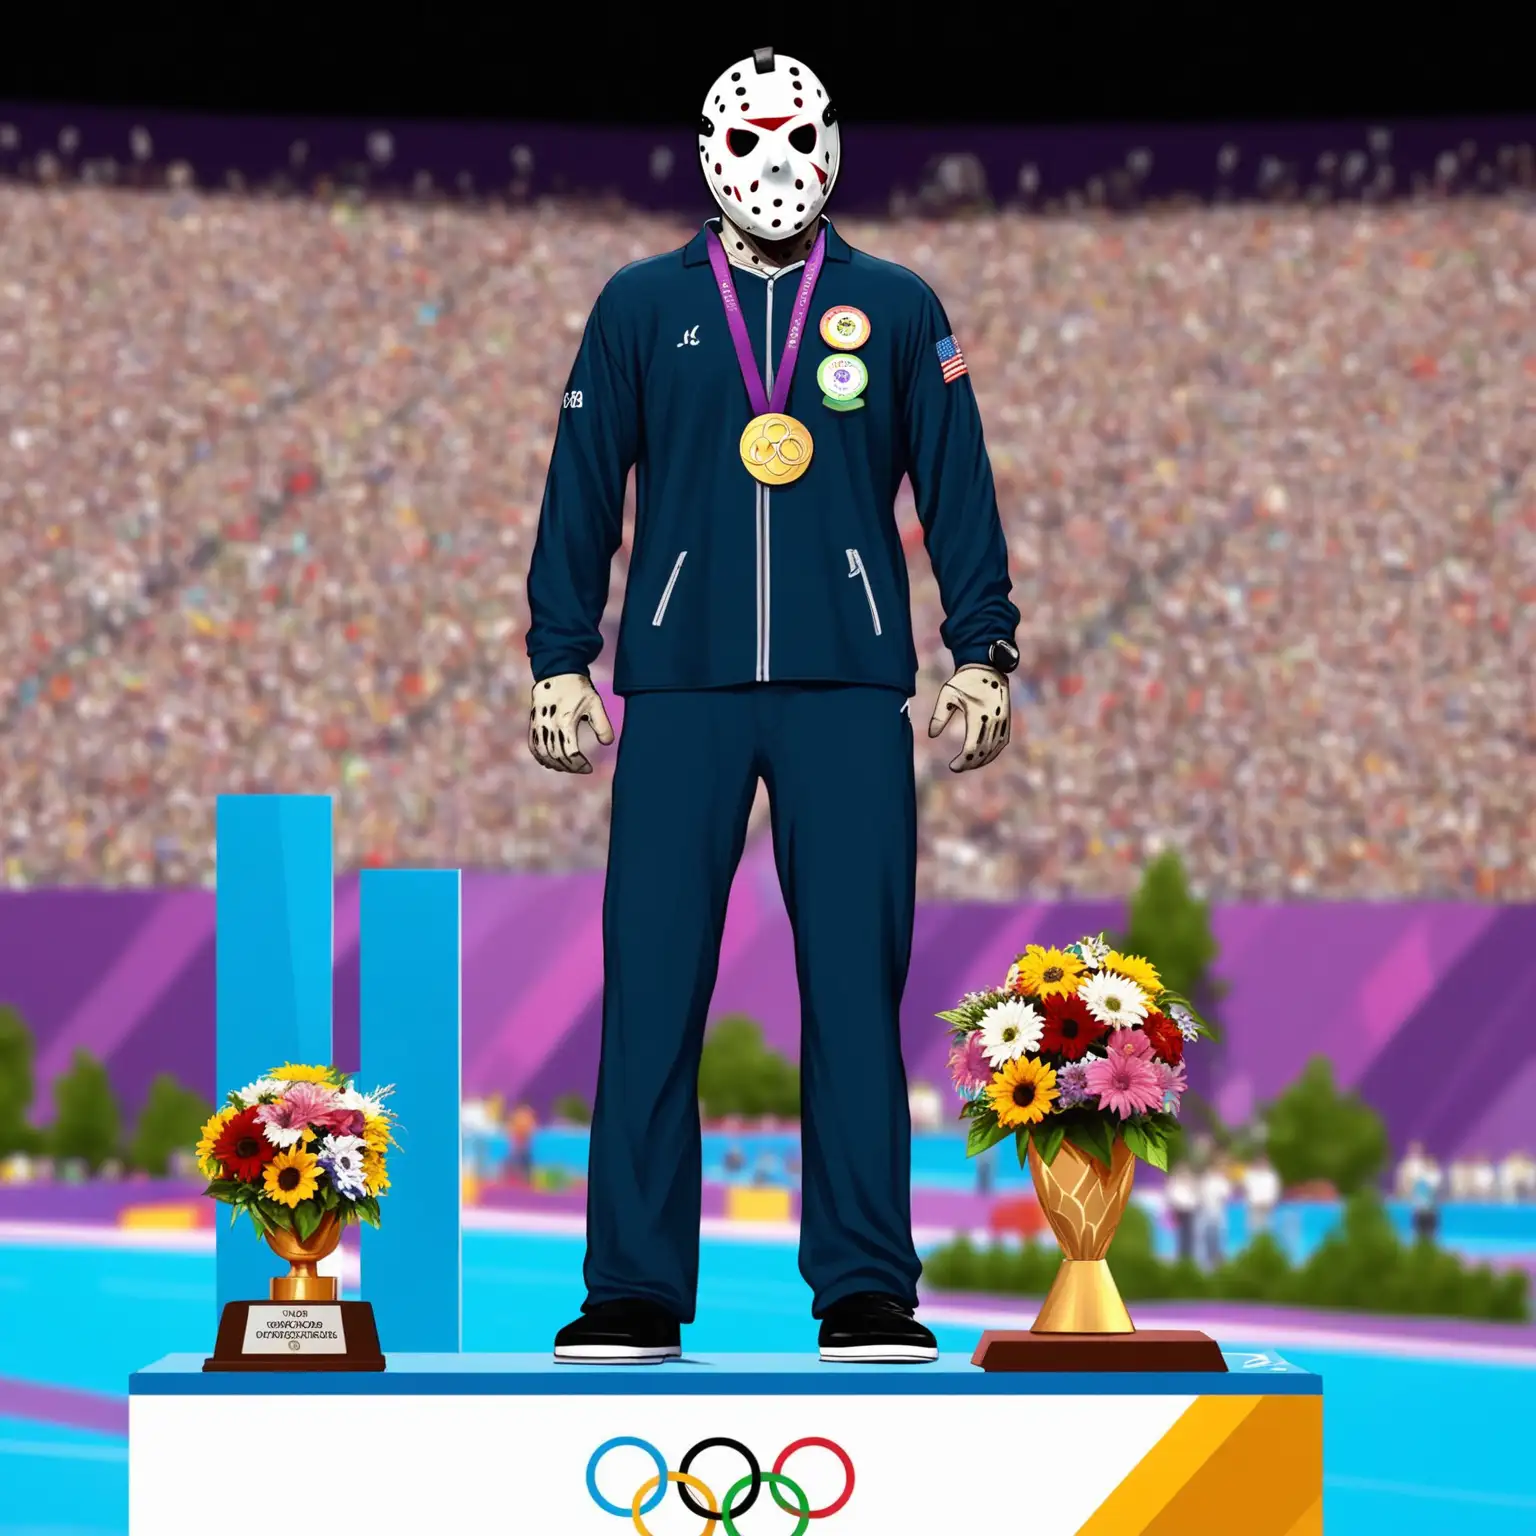 Jason Voorhees Wins Gold at Summer Olympics